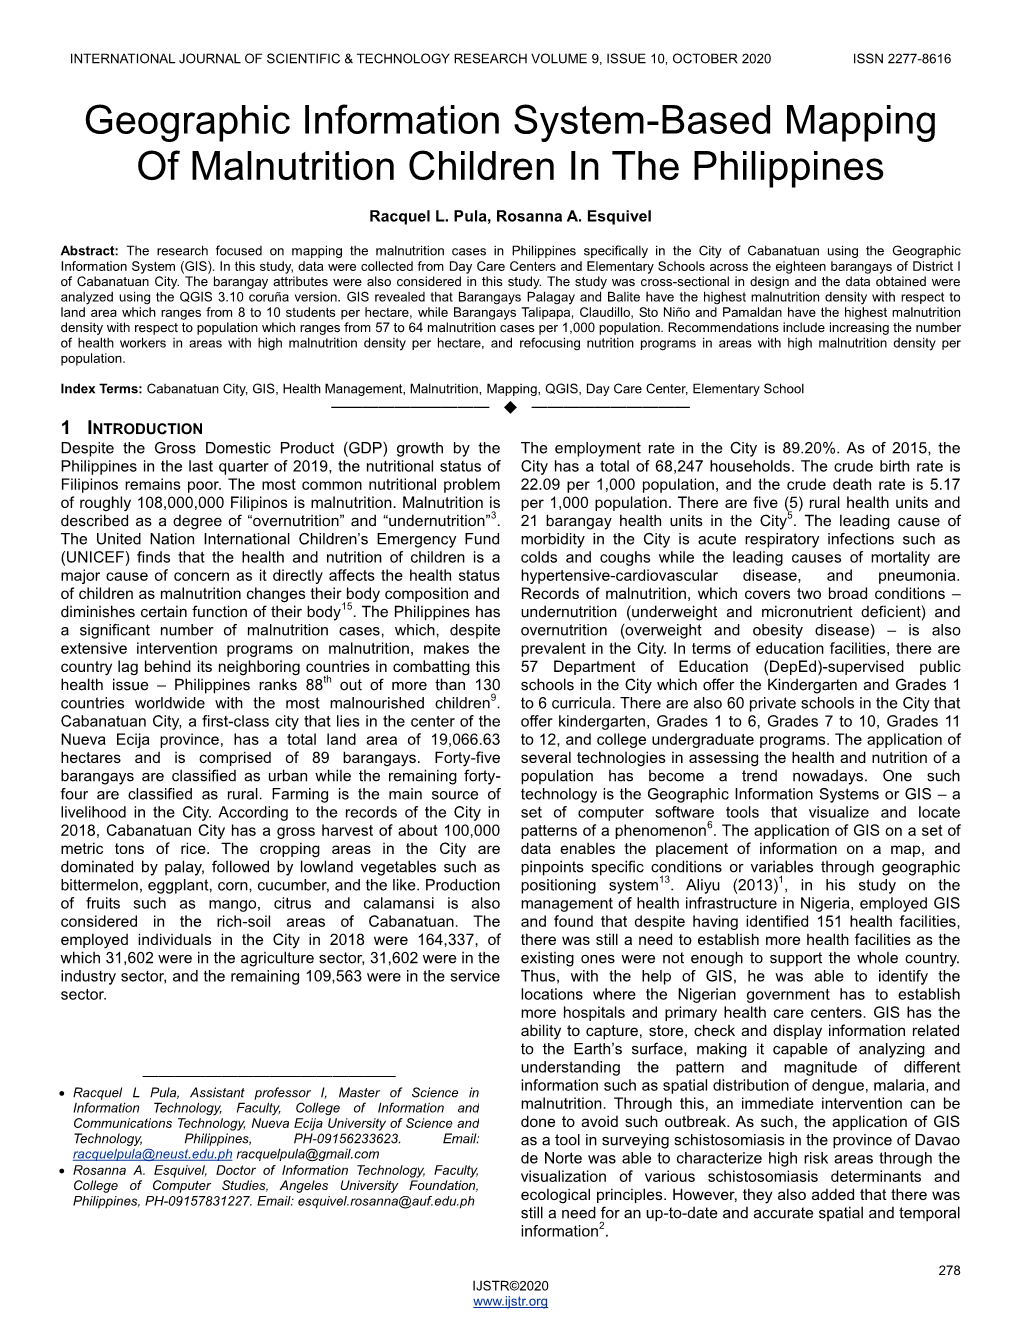 Geographic Information System-Based Mapping of Malnutrition Children in the Philippines